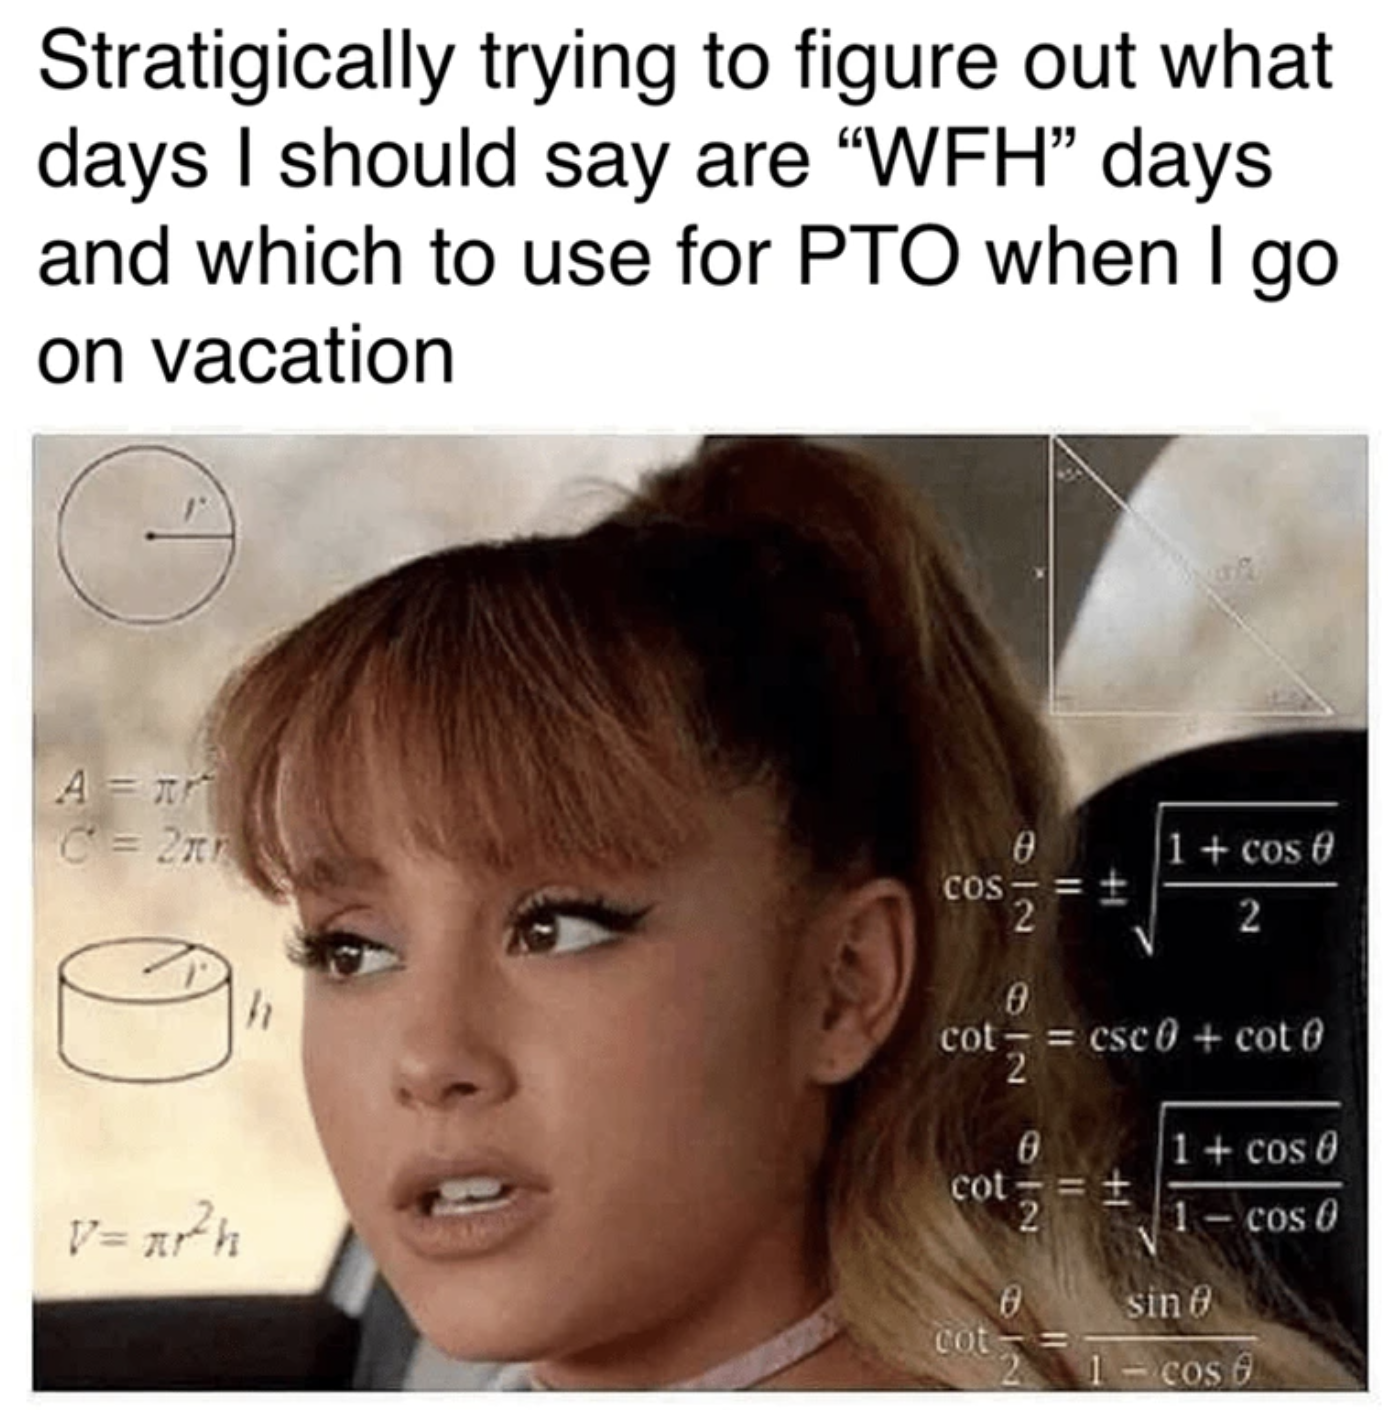 confused ariana - Stratigically trying to figure out what days I should say are "Wfh" days and which to use for Pto when I go on vacation A x C2x V xh h Cos 1 cos 0 1 2 cot csc0 cot 0 cot 2 1 cos 0 1 cos 0 cot sin 1cos 6